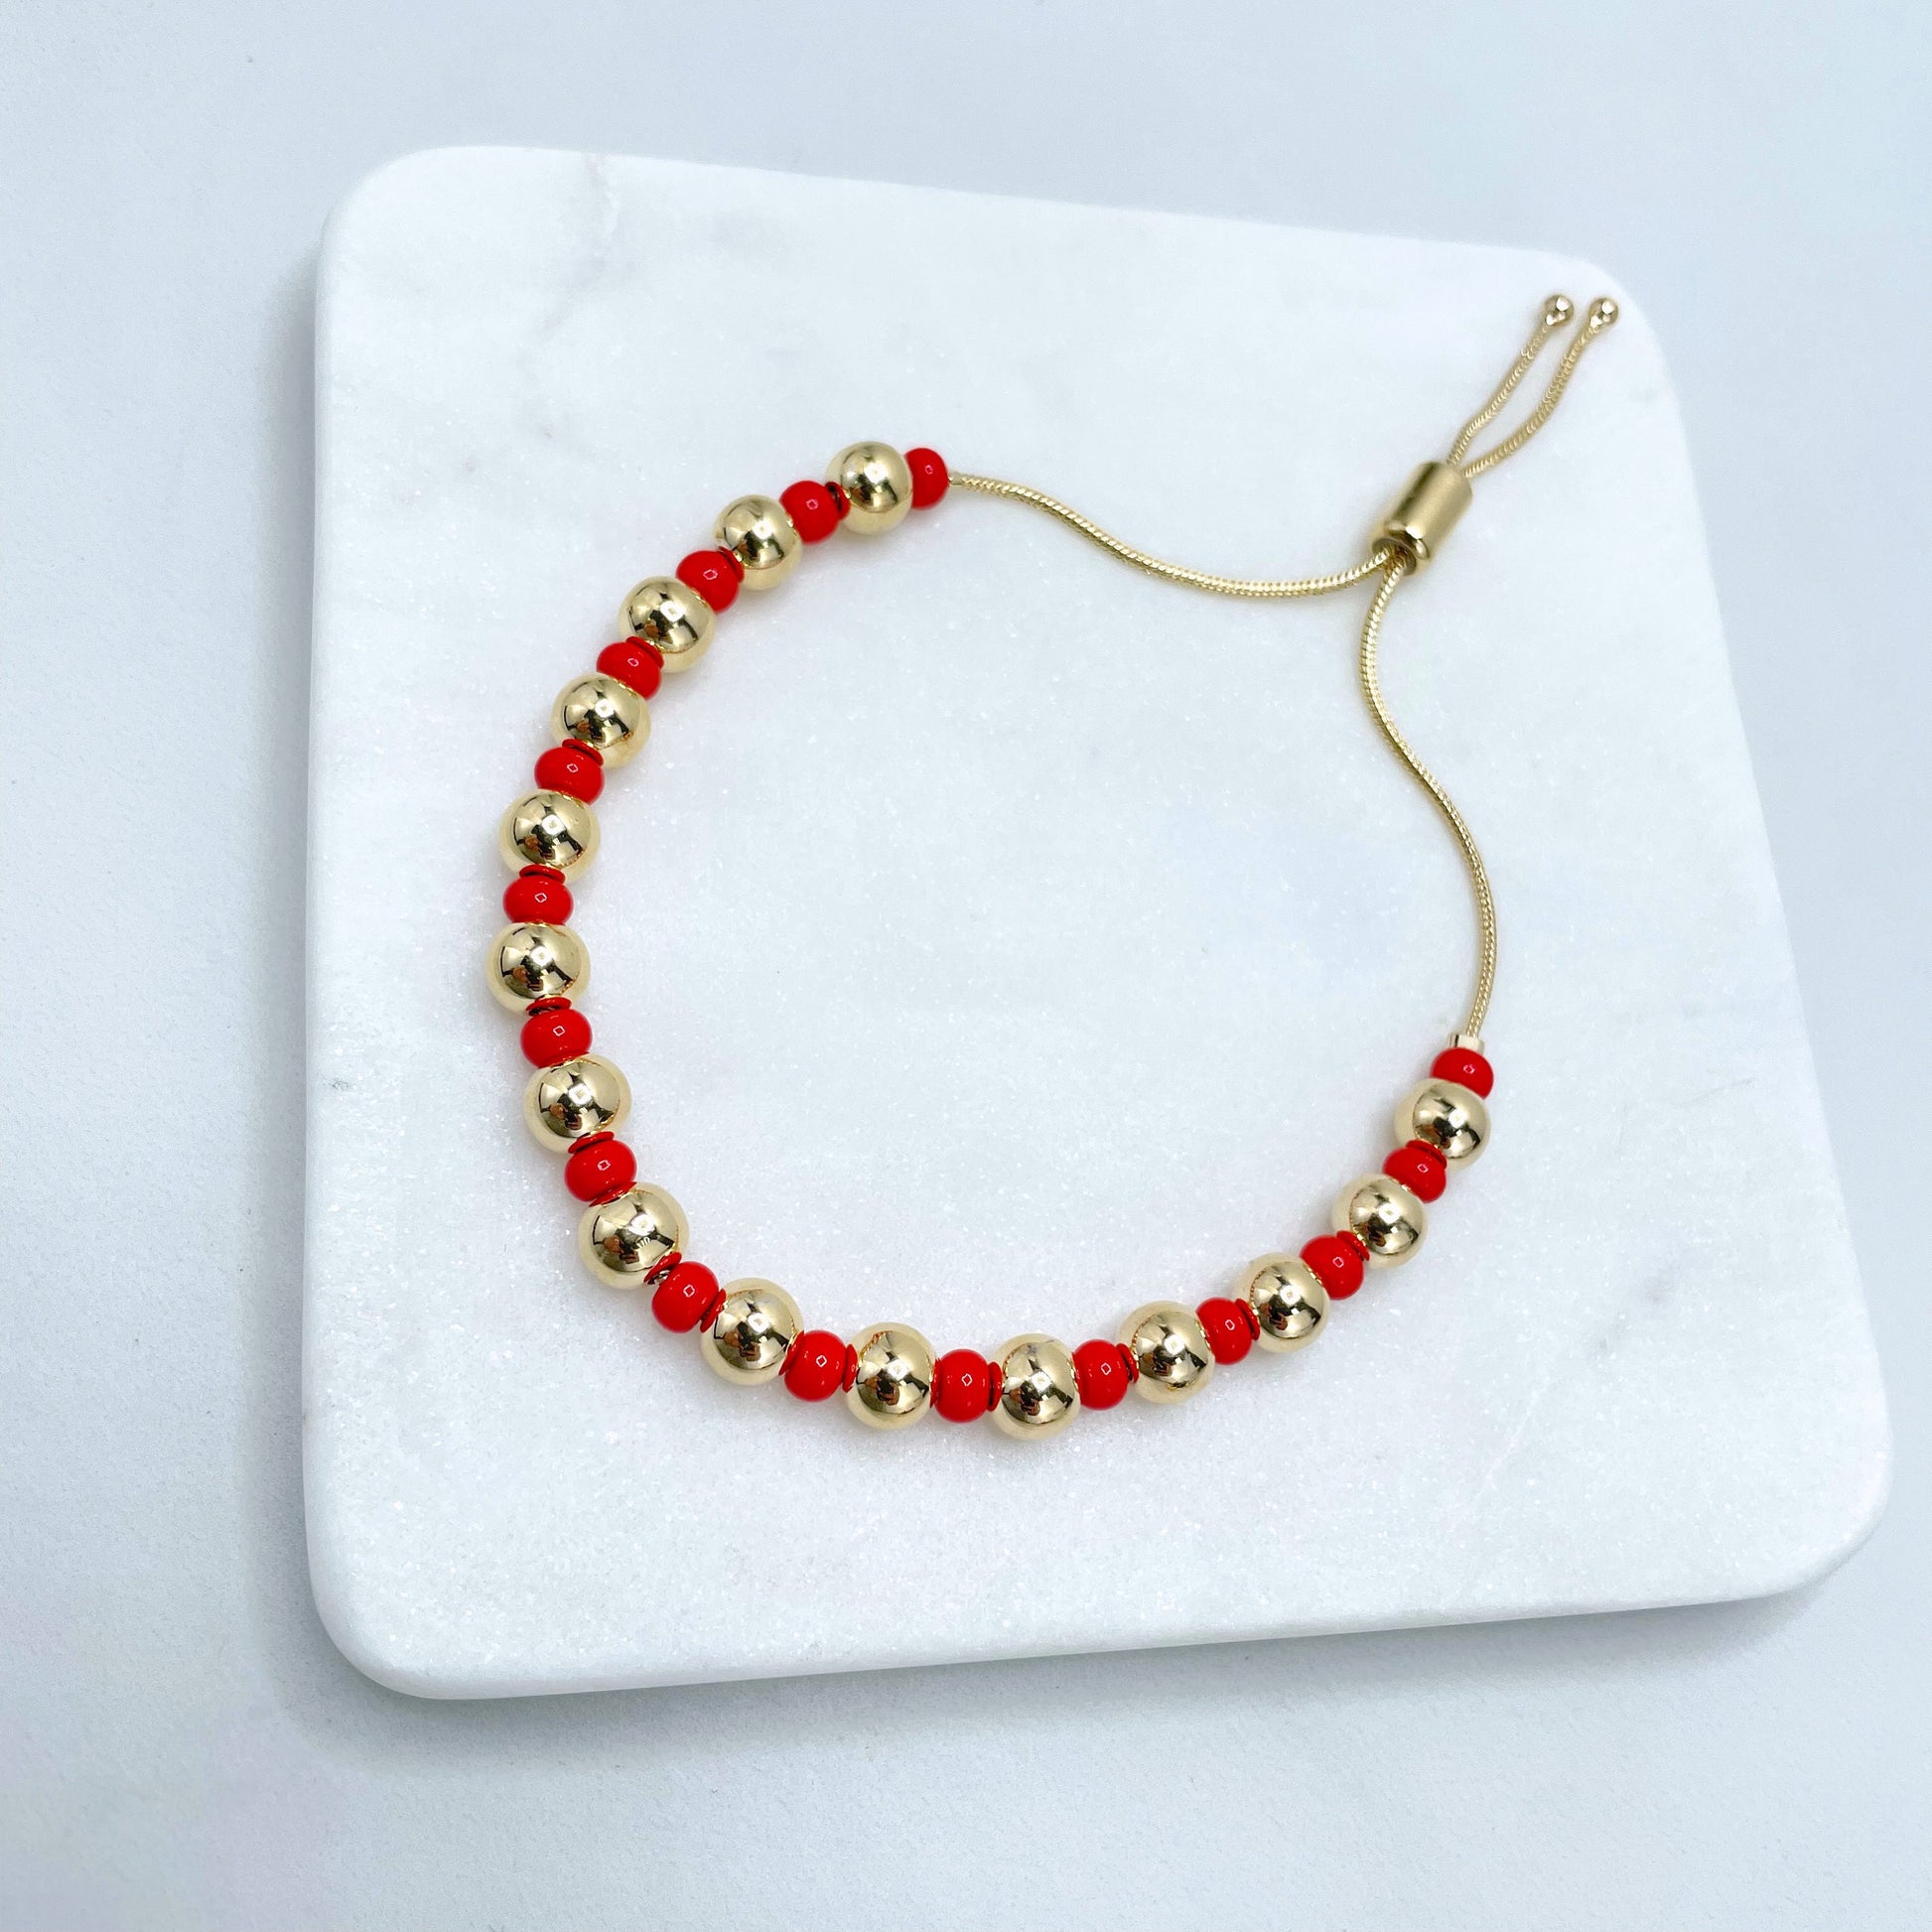 18k Gold Filled 1mm Box Chain in Gold & Colored Beads, Red, Blue or Yellow, Adjustable Bracelet, Wholesale Jewelry Making Supplies